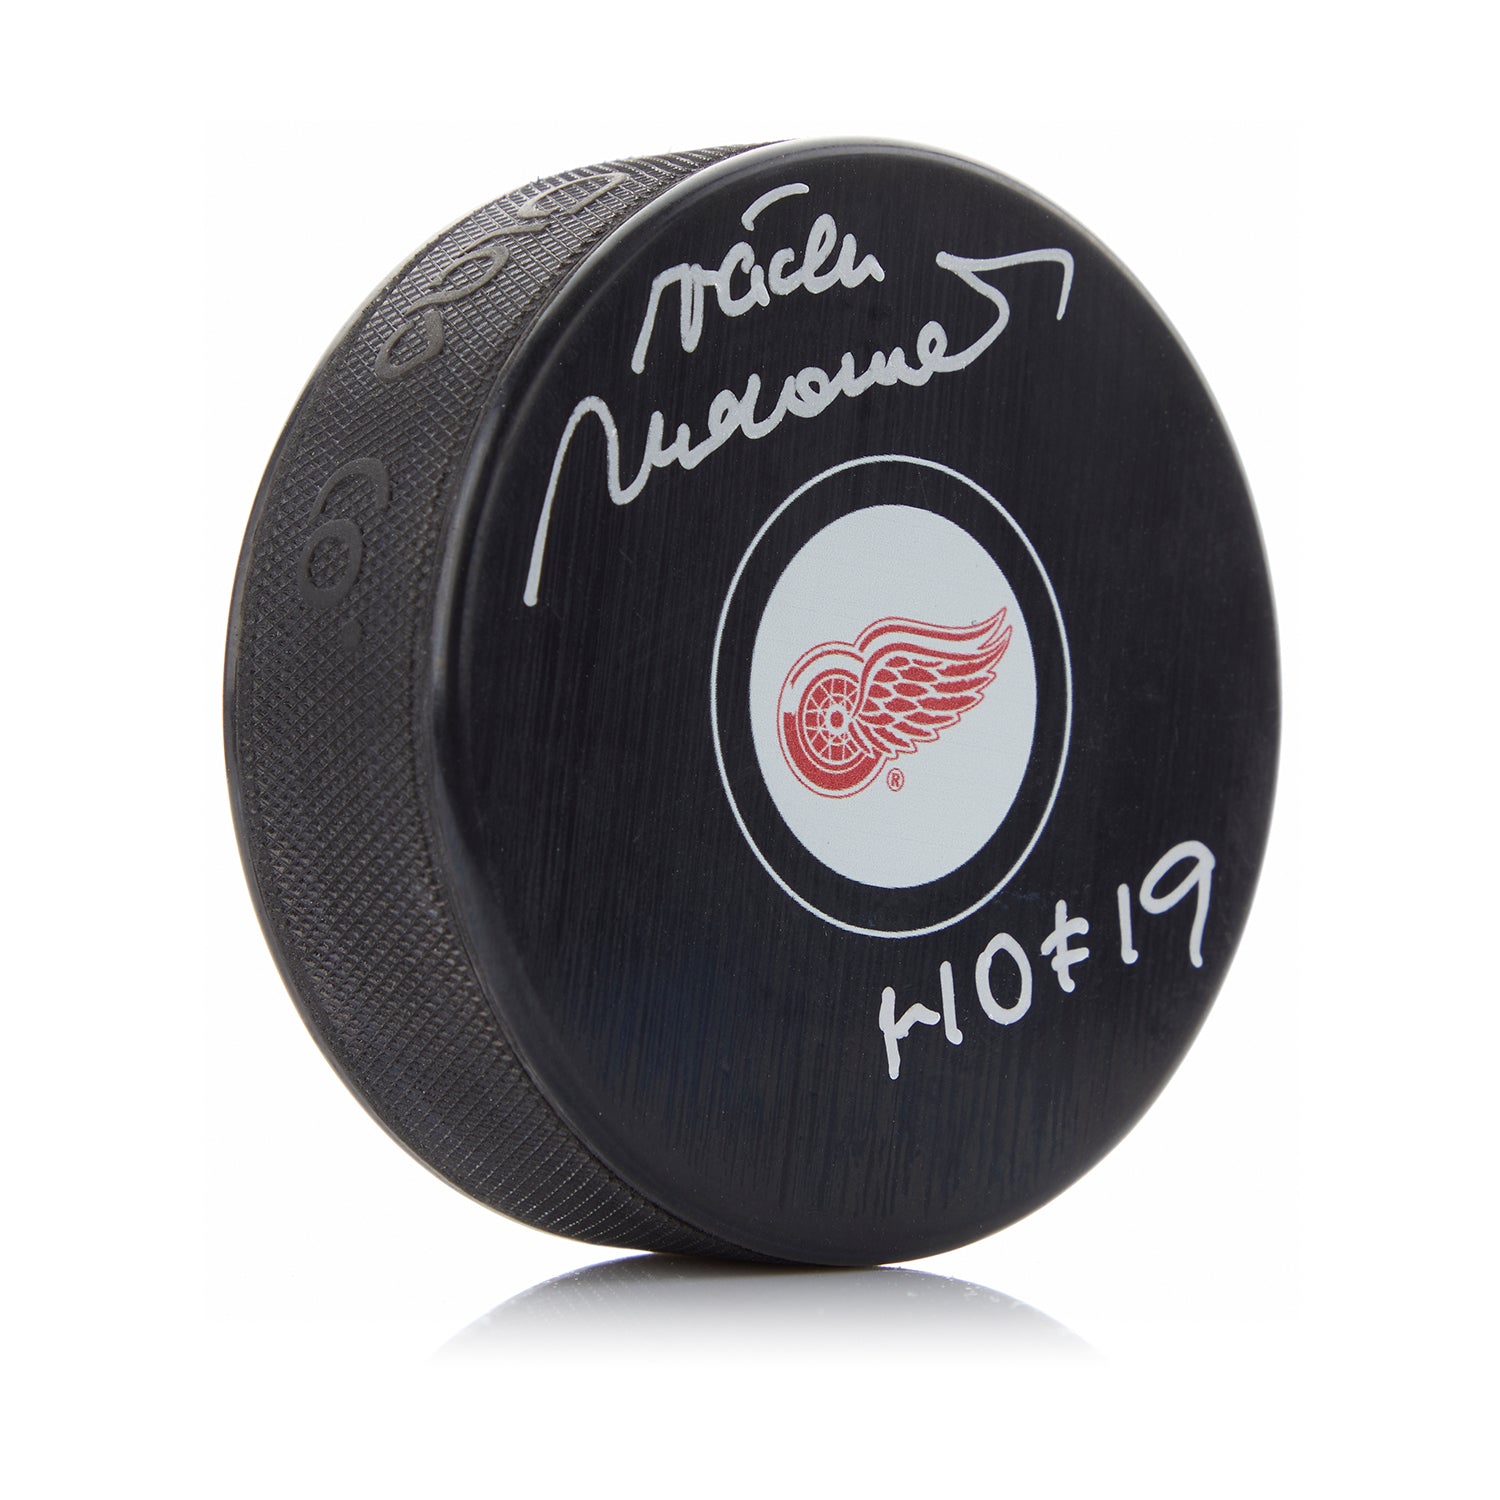 Vaclav Nedomansky Signed Detroit Red Wings Puck with HOF Note